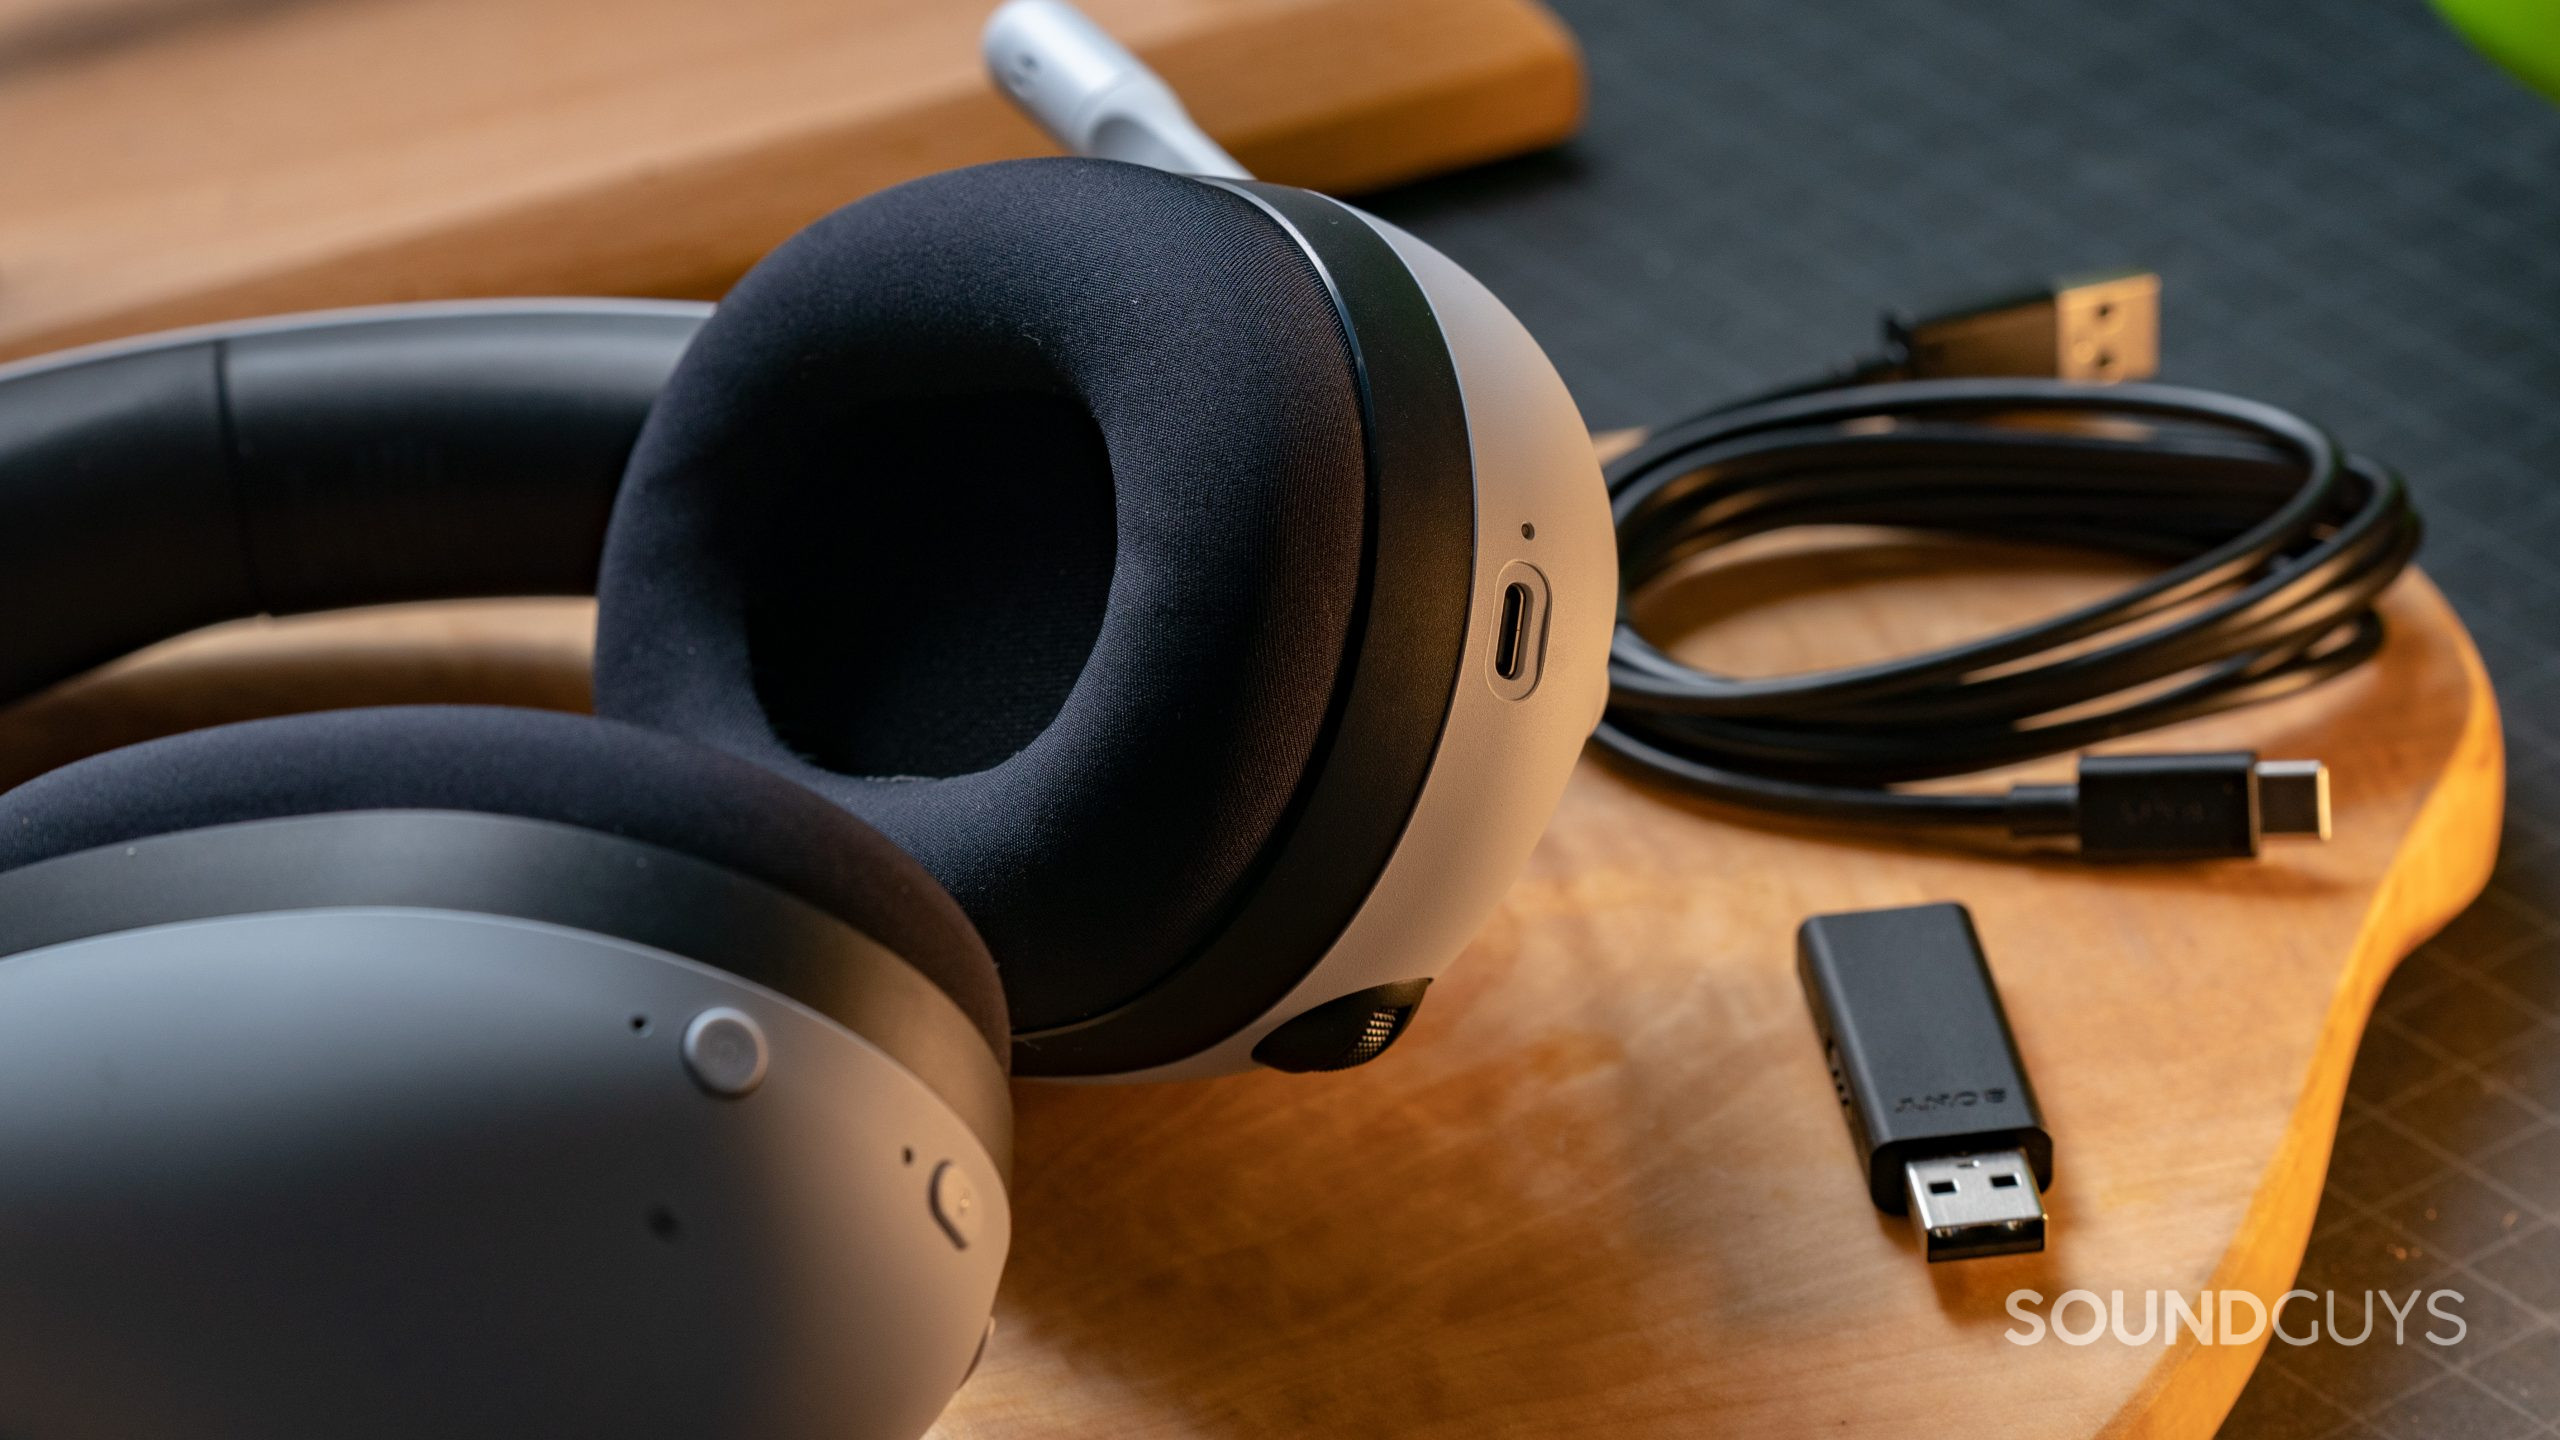 The Sony INZONE H7 gaming headset lays on wooden surface next to its dongle and charging cord, ear pads and charging port in view